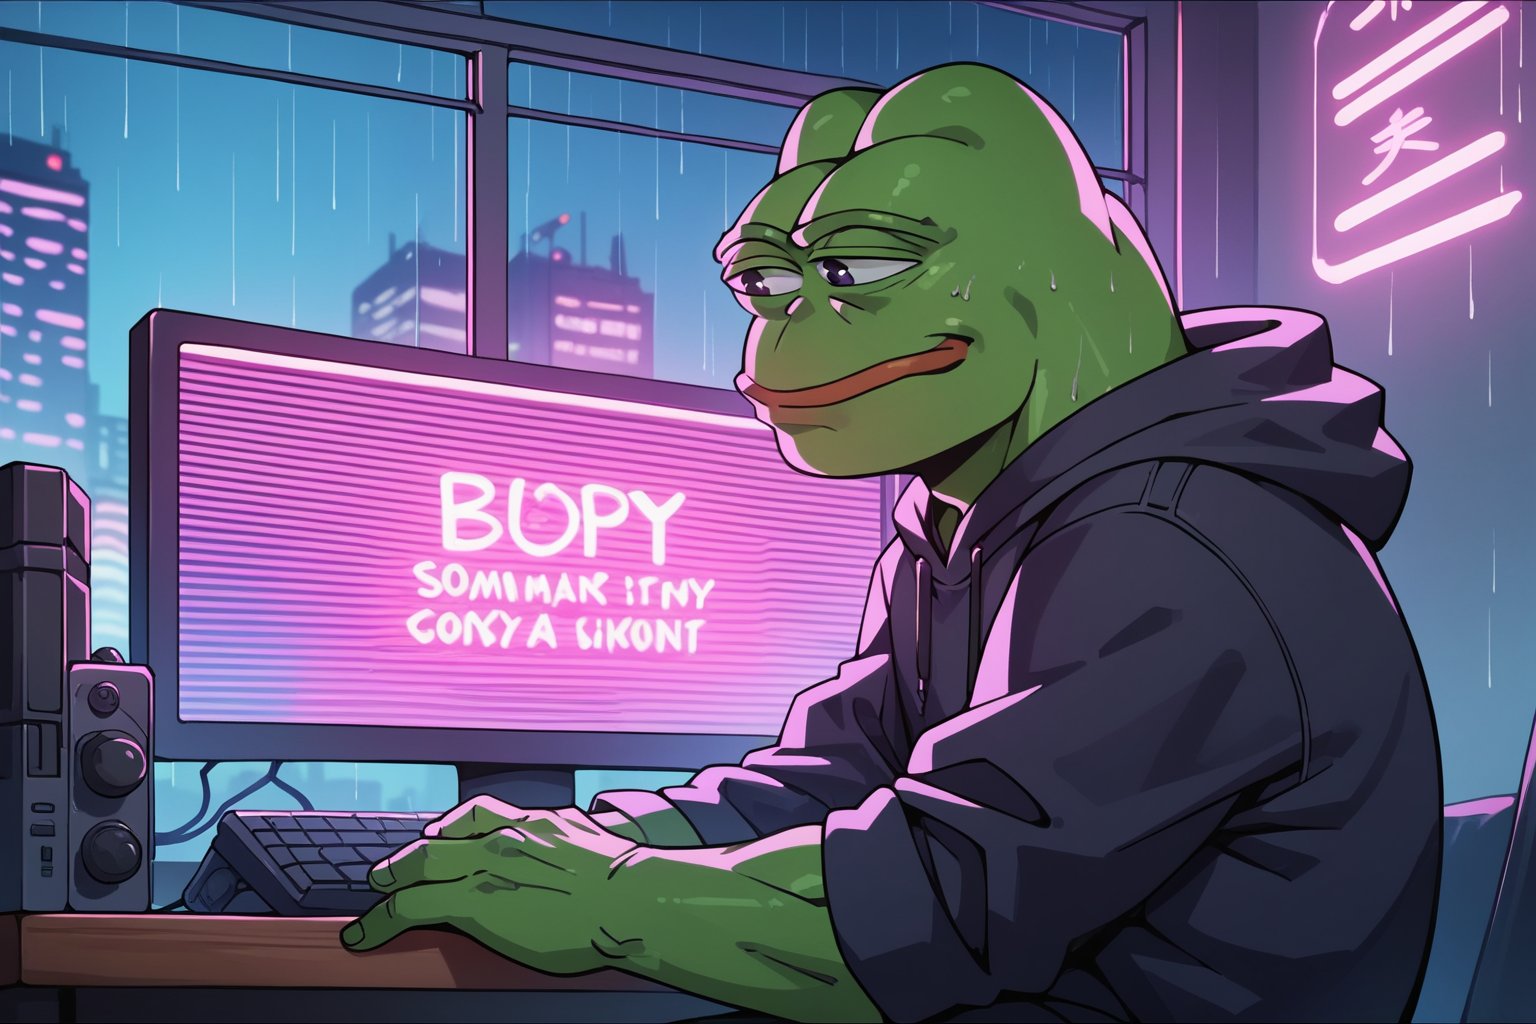 score_9, score_8, score_7, score_7_up, score_8_up, pepe the frog wearing black hoodie, sitting on a chair, computer, upper body, interior bedroom, night, cyberpunk city view out of the window,neon light, purple neon lights, rain, rain outside, rain on the window,C7b3rp0nkStyle